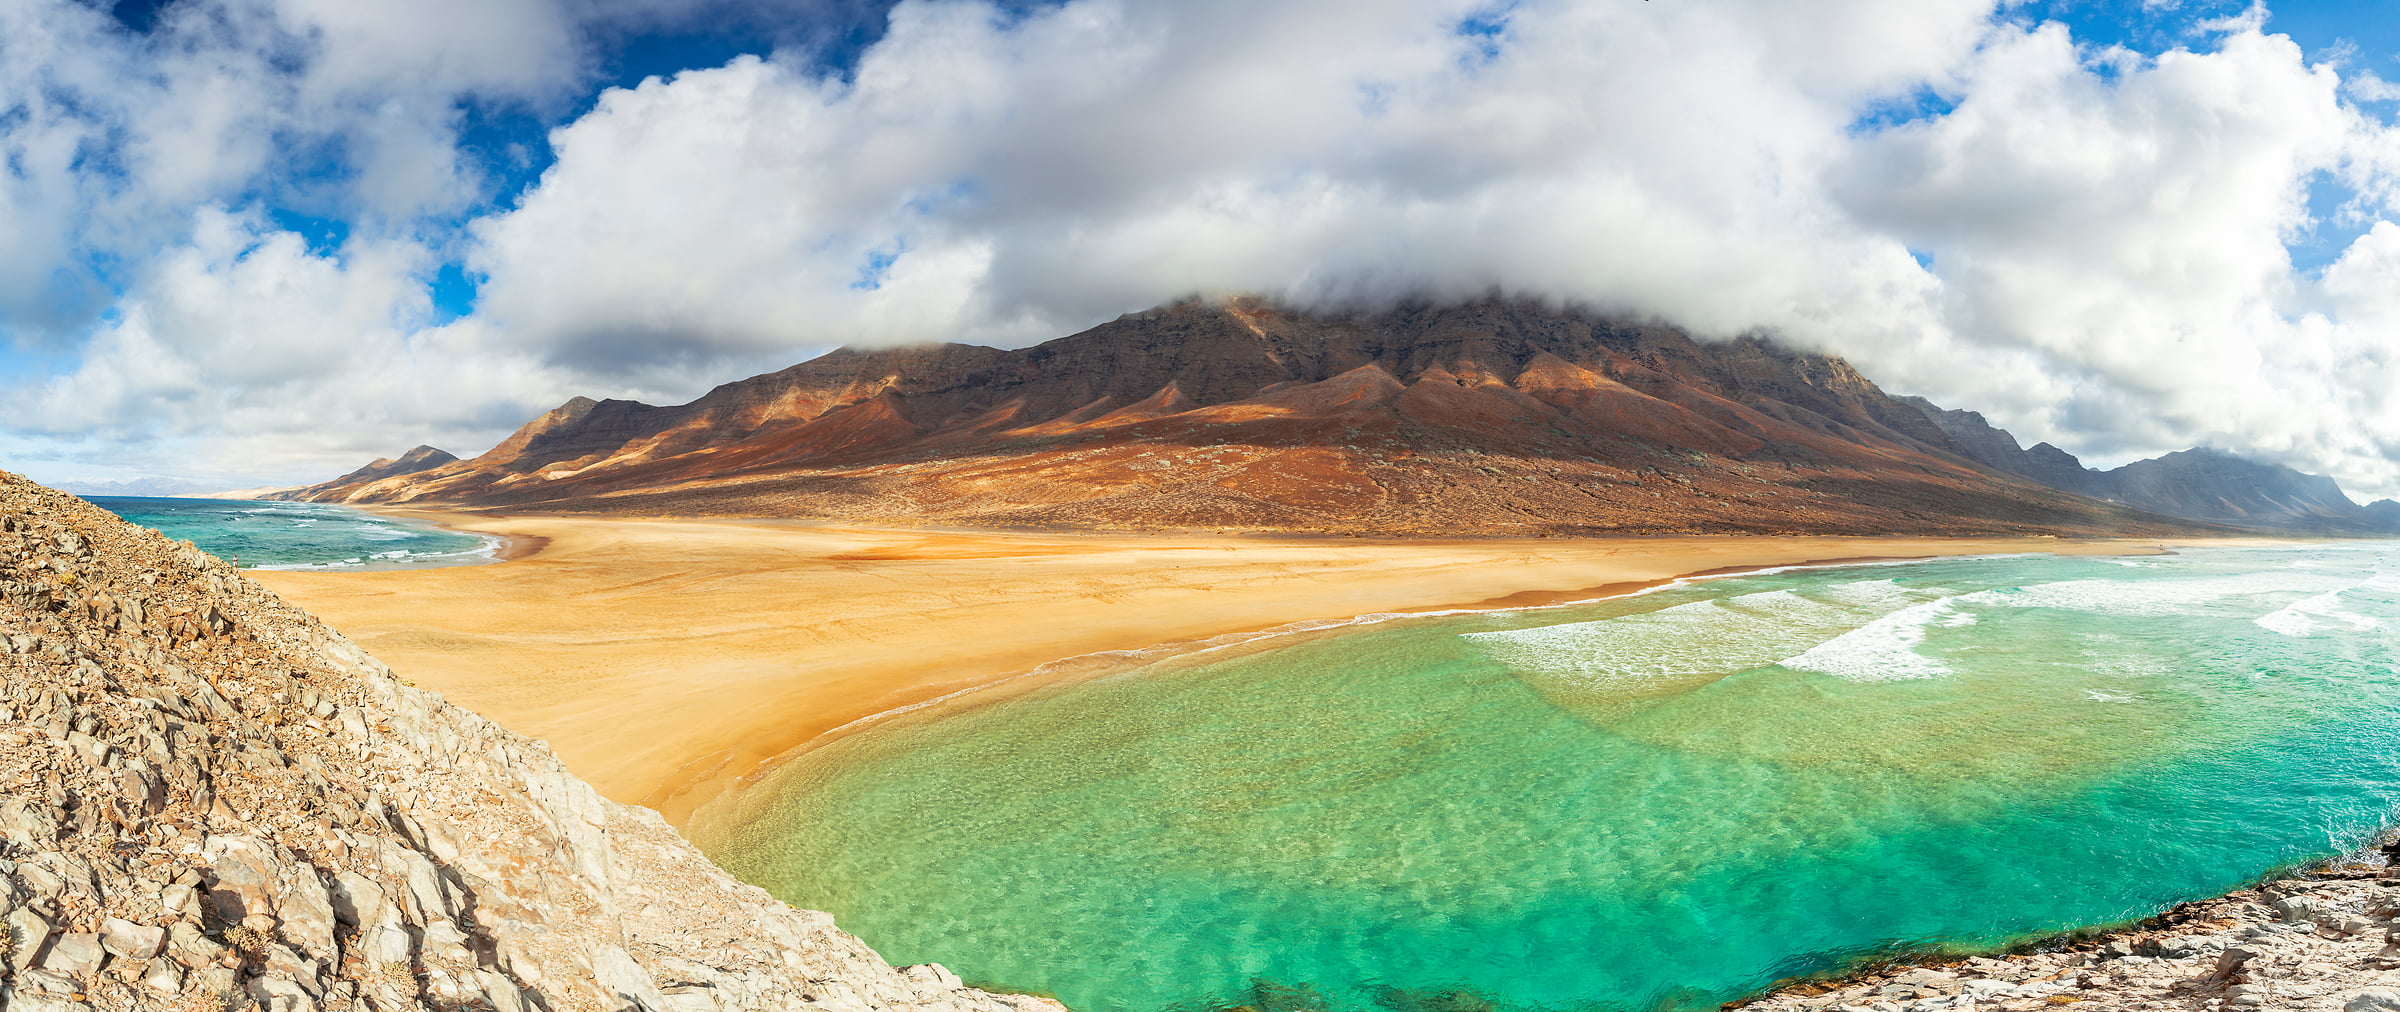 165 megapixels! A very high resolution, large-format VAST photo print of a beach with green water on the Canary Islands; landscape photograph created by Roberto Moiola in Cofete Beach, Fuerteventura, Canary Islands